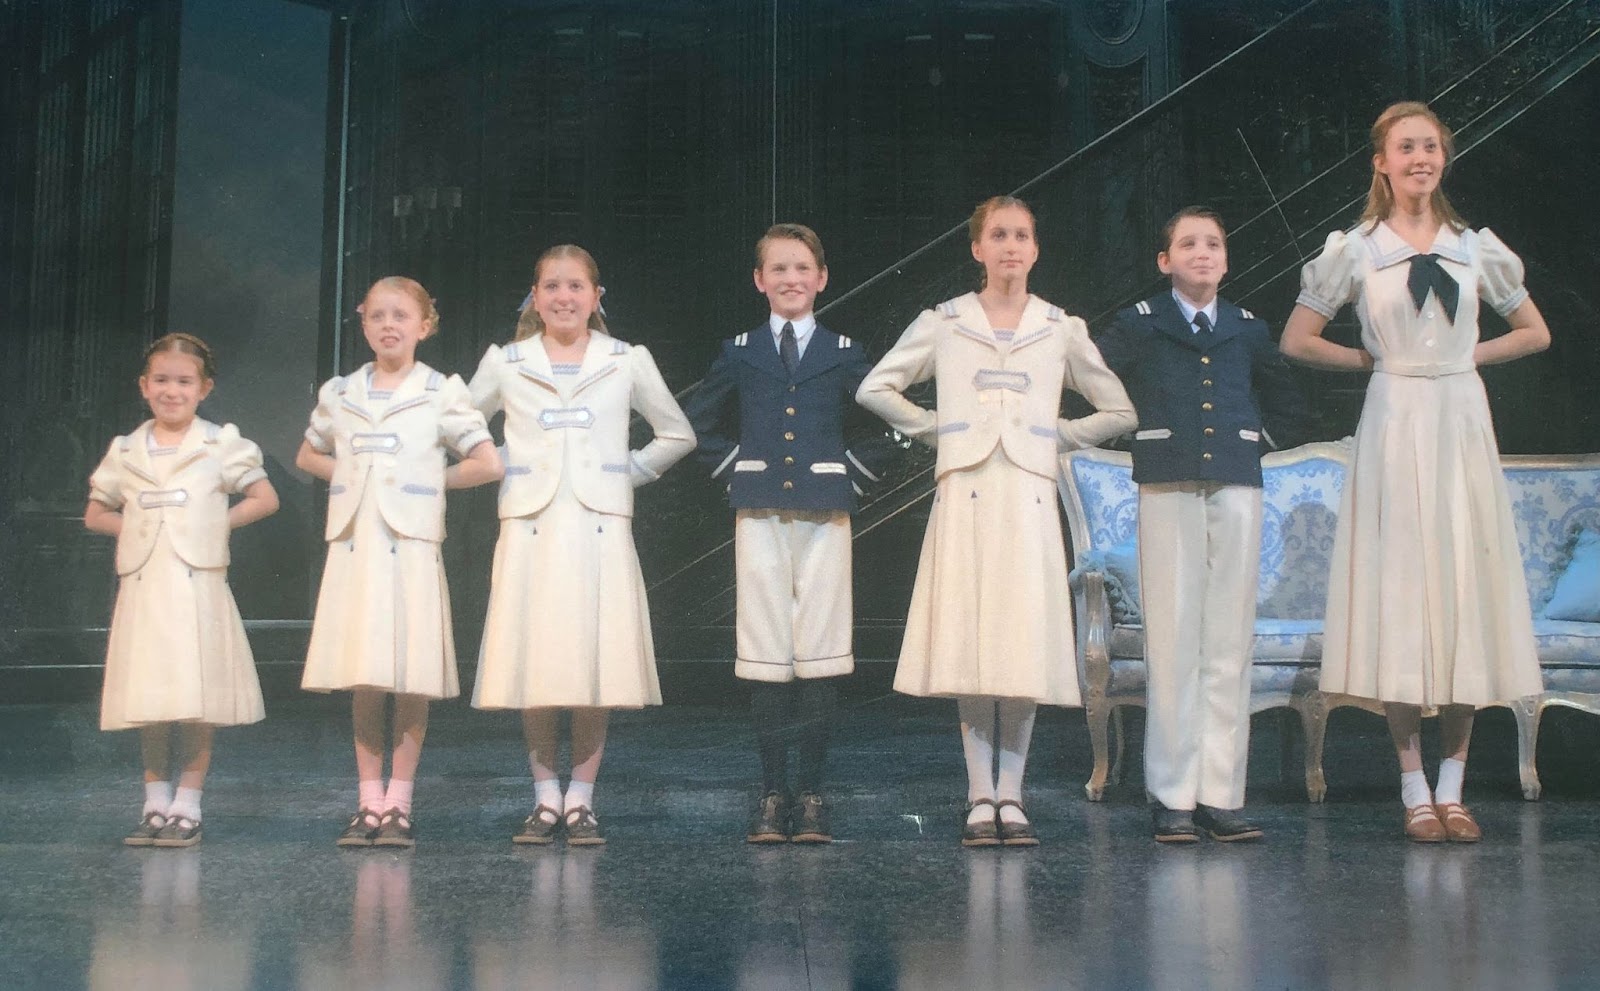 Julianne Bisnaire sound of music kids standing in line on stage